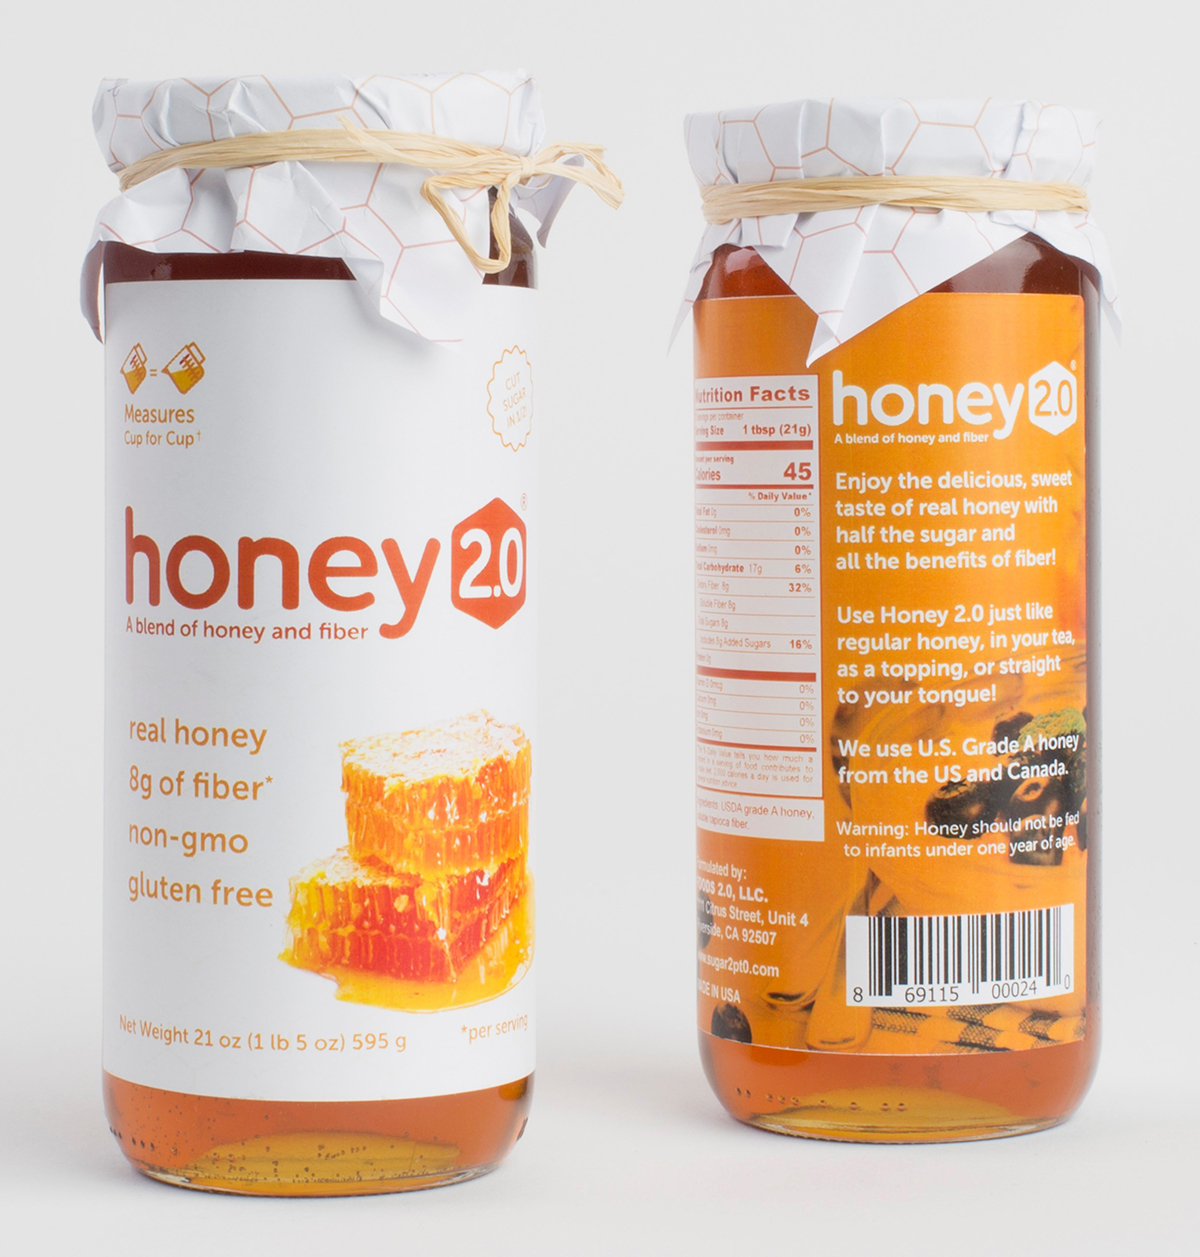 Reduce Sugar by 50% with Honey 2.0.